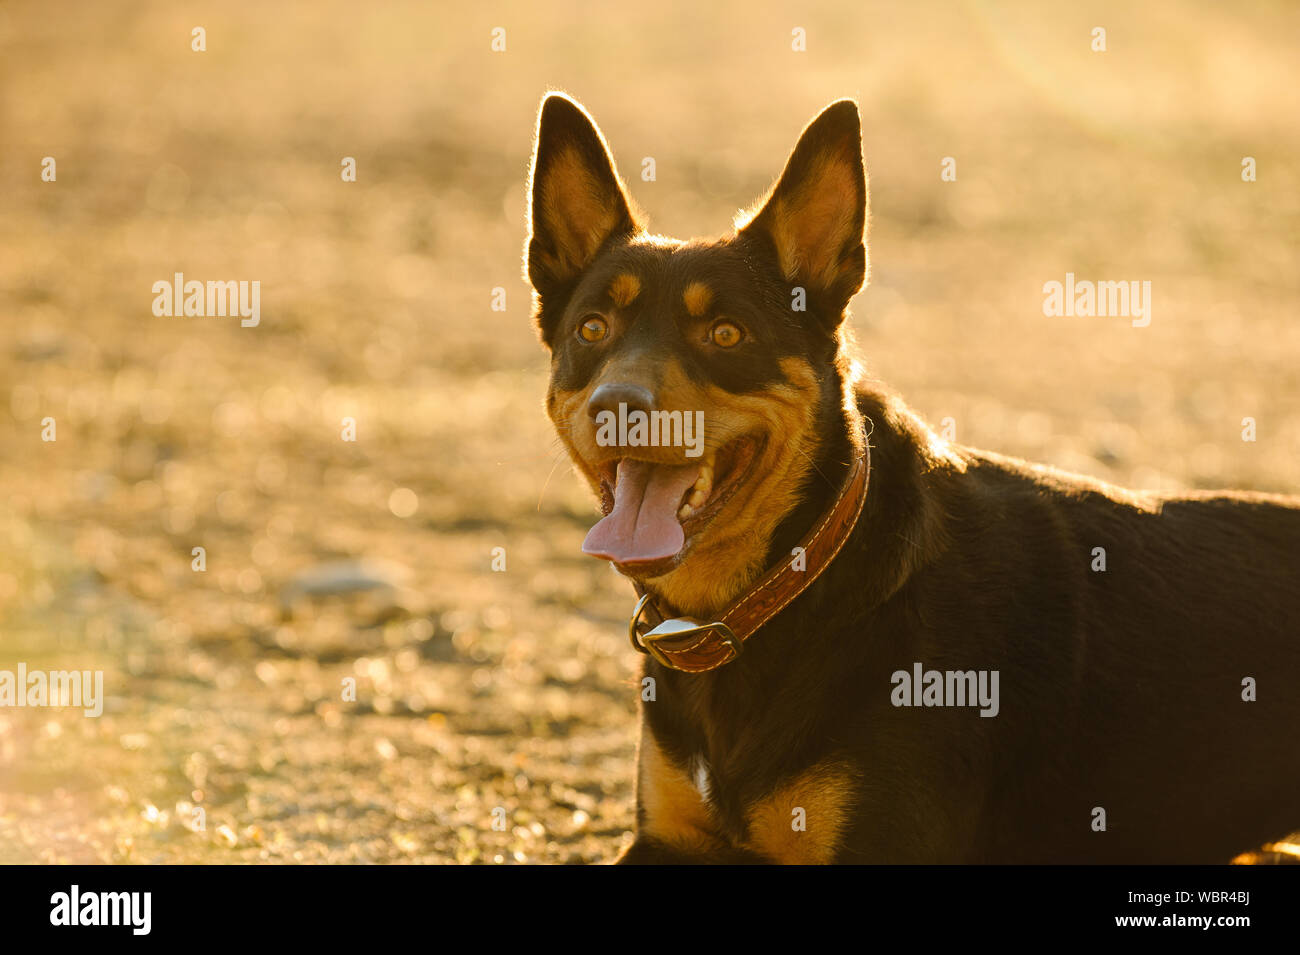 Close-up Of Australian Kelpie Sticking Out Tongue In Sunny Day On Field Stock Photo